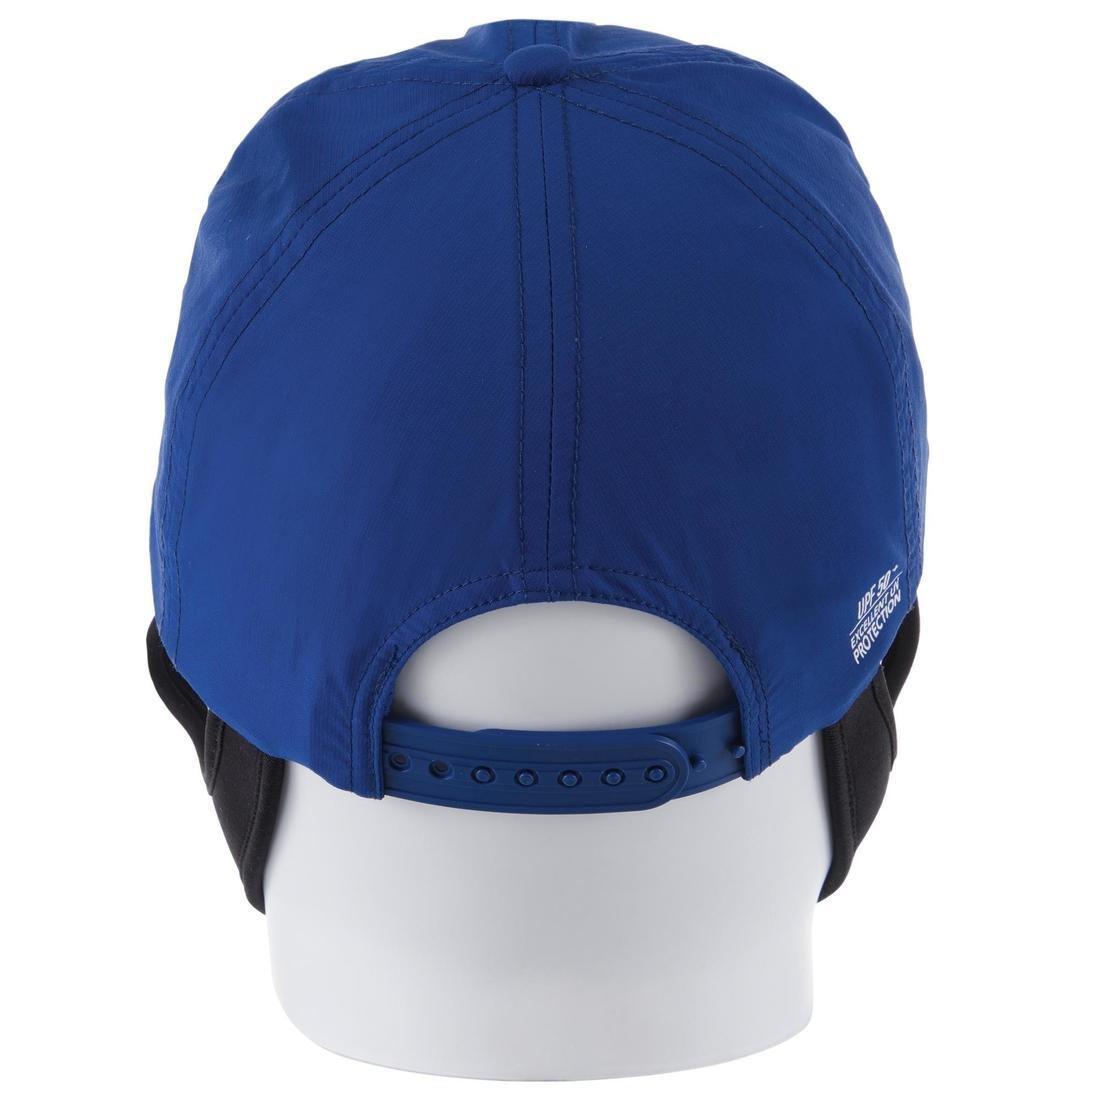 OLAIAN - Childrens Uv Protection Surfing Cap, Royal Blue